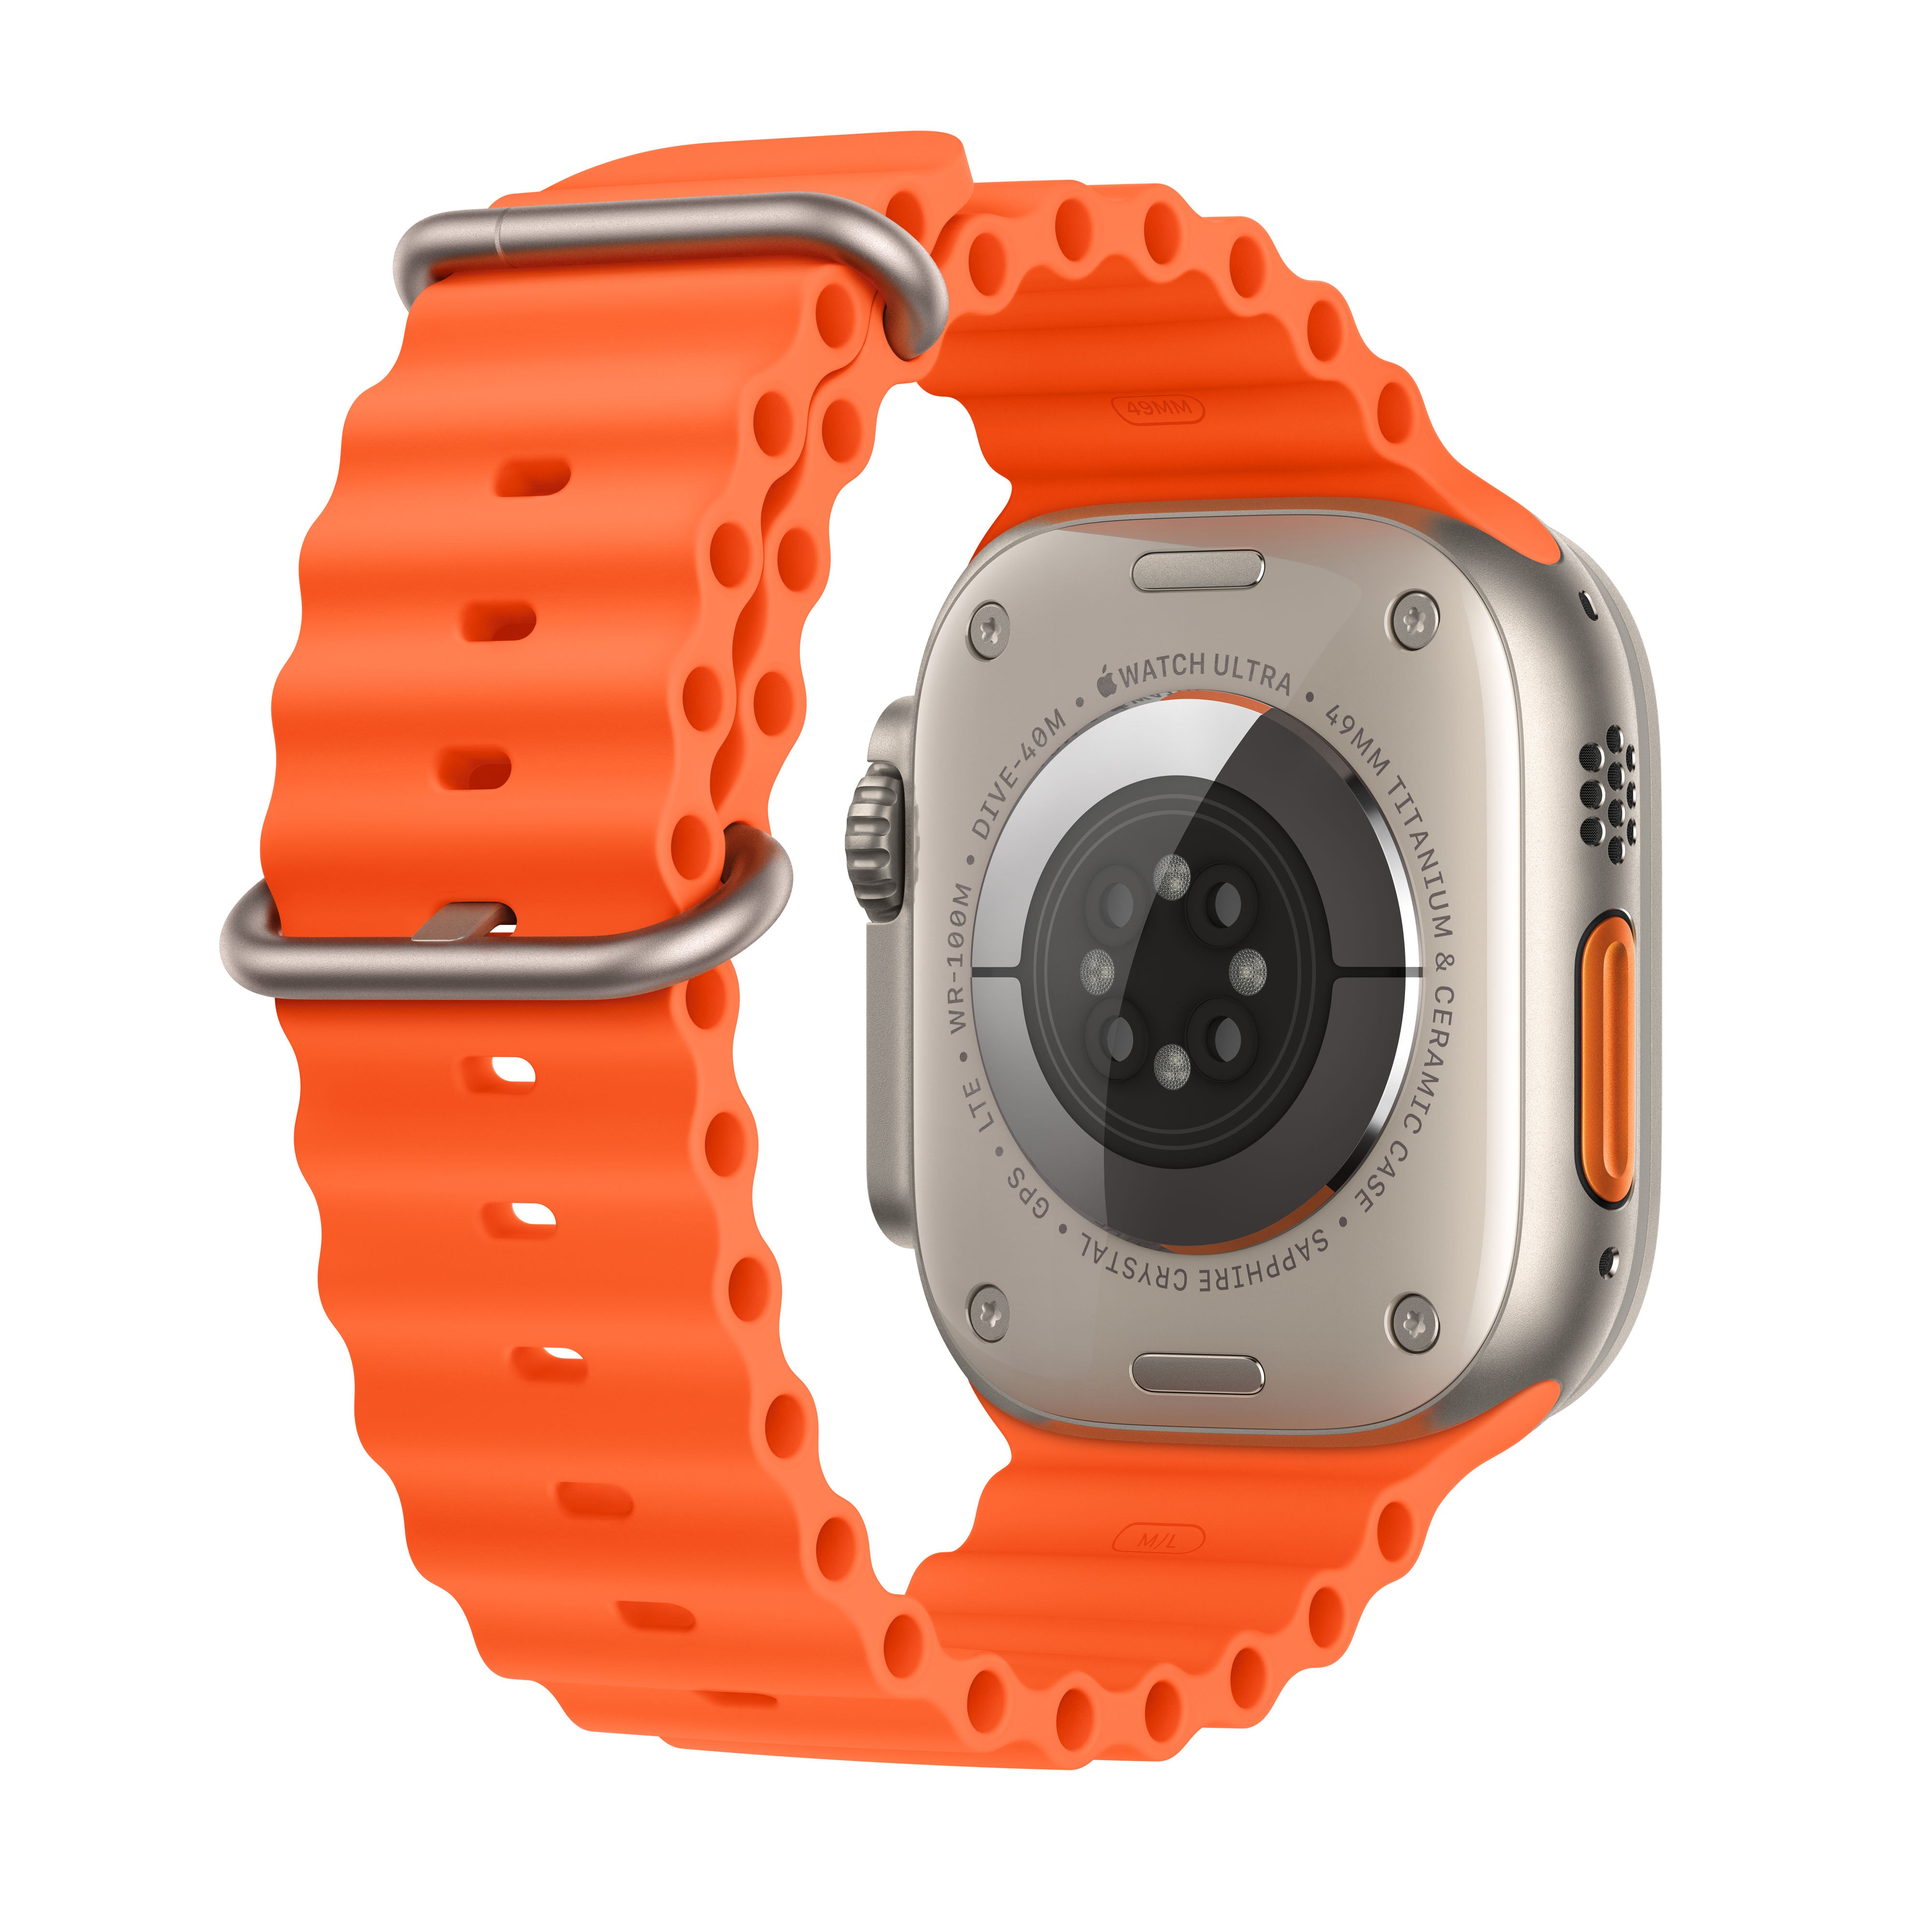 Ultra Watch Cellular, Apple iStore Case Oce 49mm - with Namibia Orange 2 Titanium + GPS